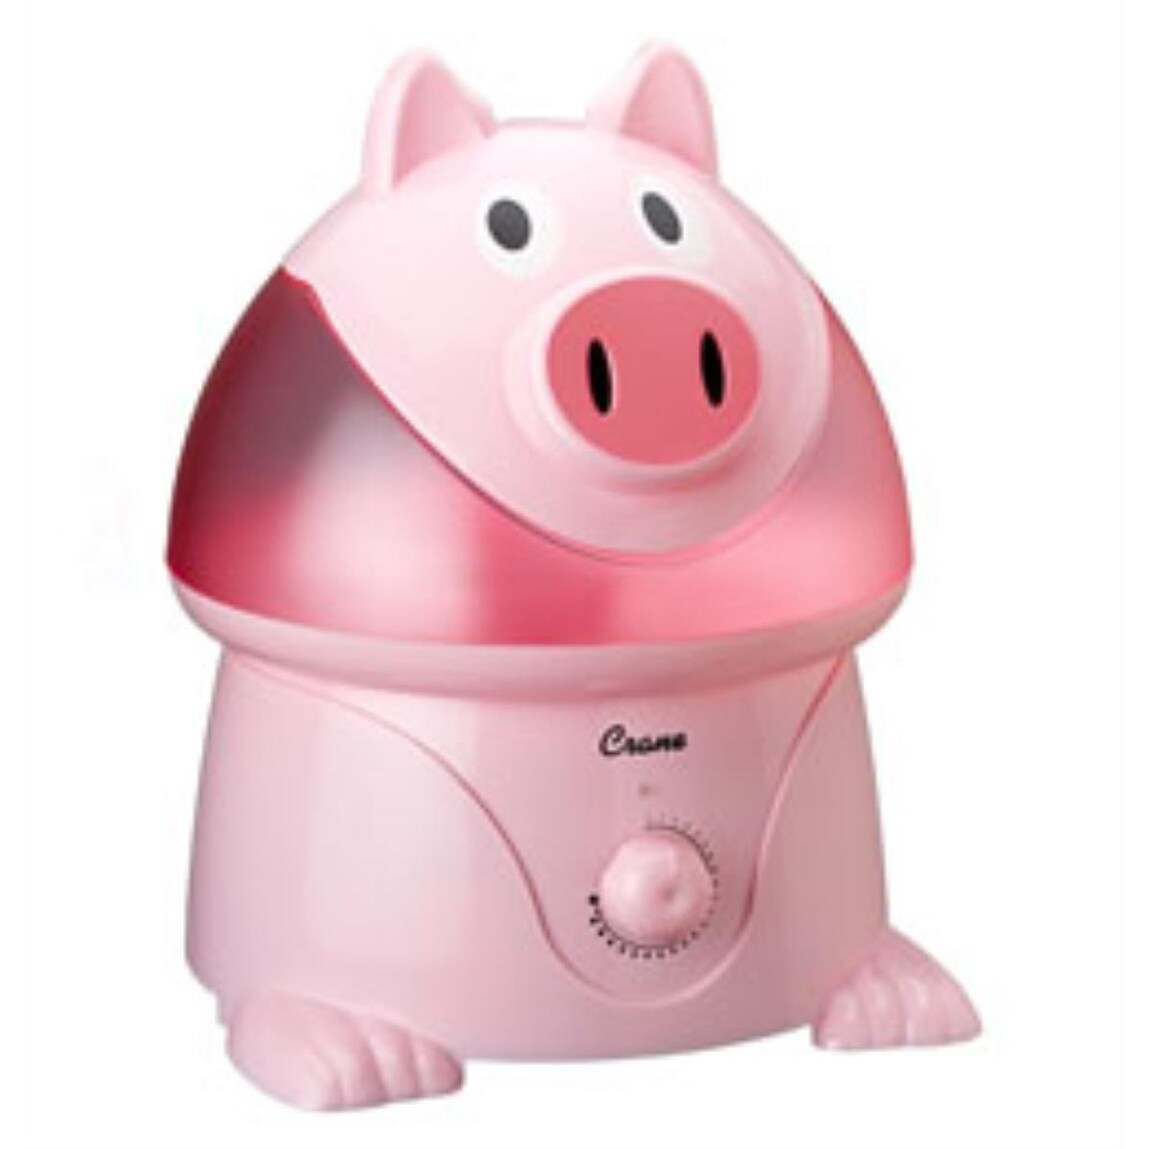 Crane EE-4139 Pig Ultrasonic Cool Mist Humidifier - Pink - Bed